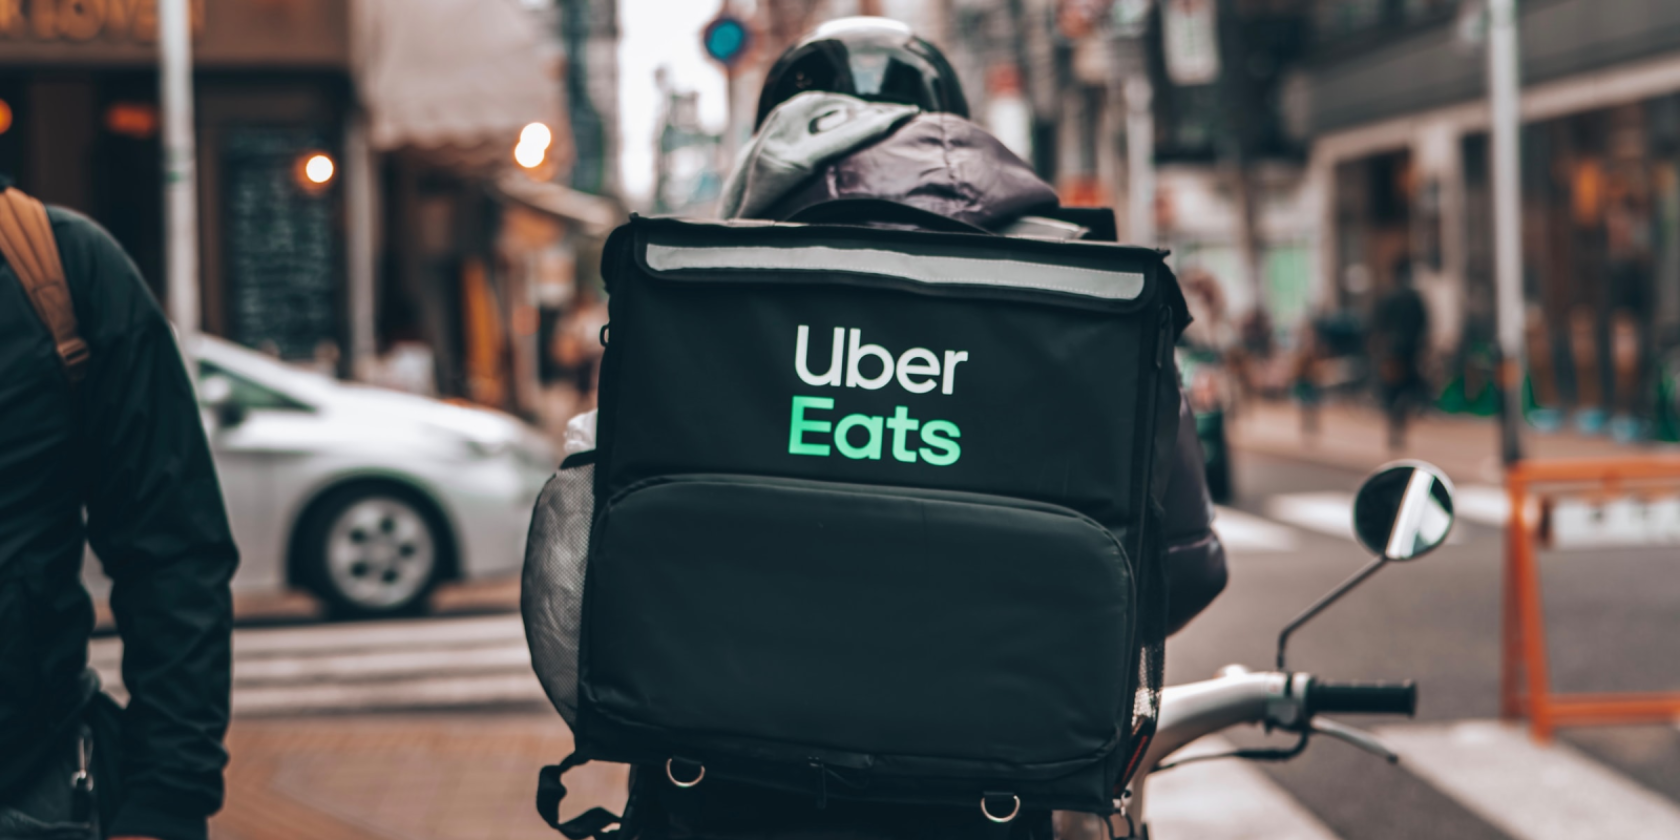 Uber Eats food delivery bike driving through traffic